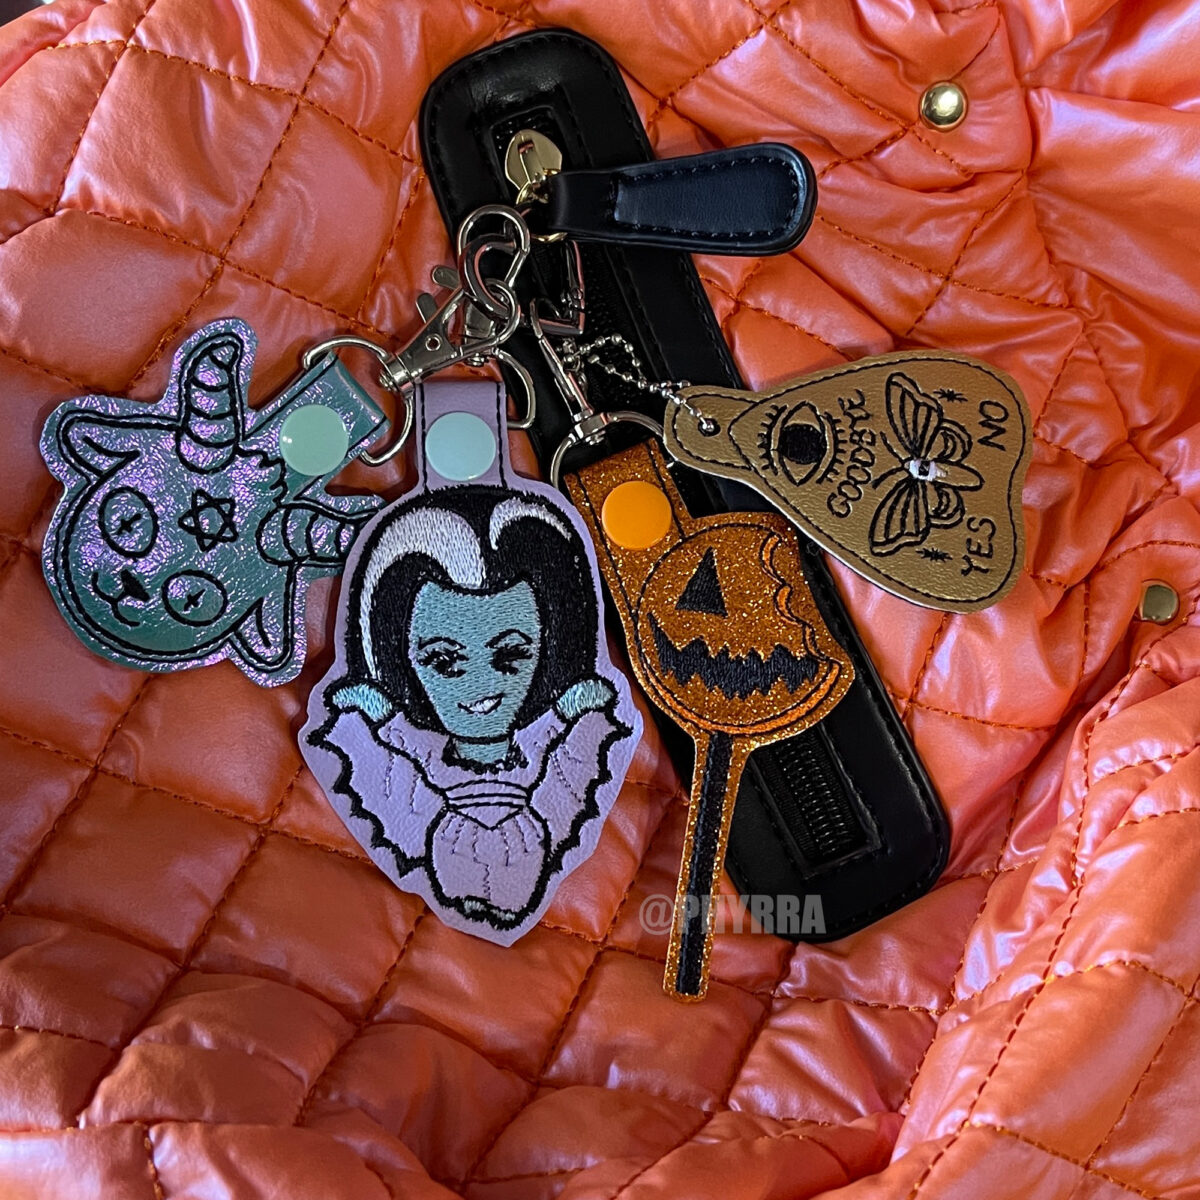 Every Day is Halloween, so Halloween Keychains on the outside of the bag